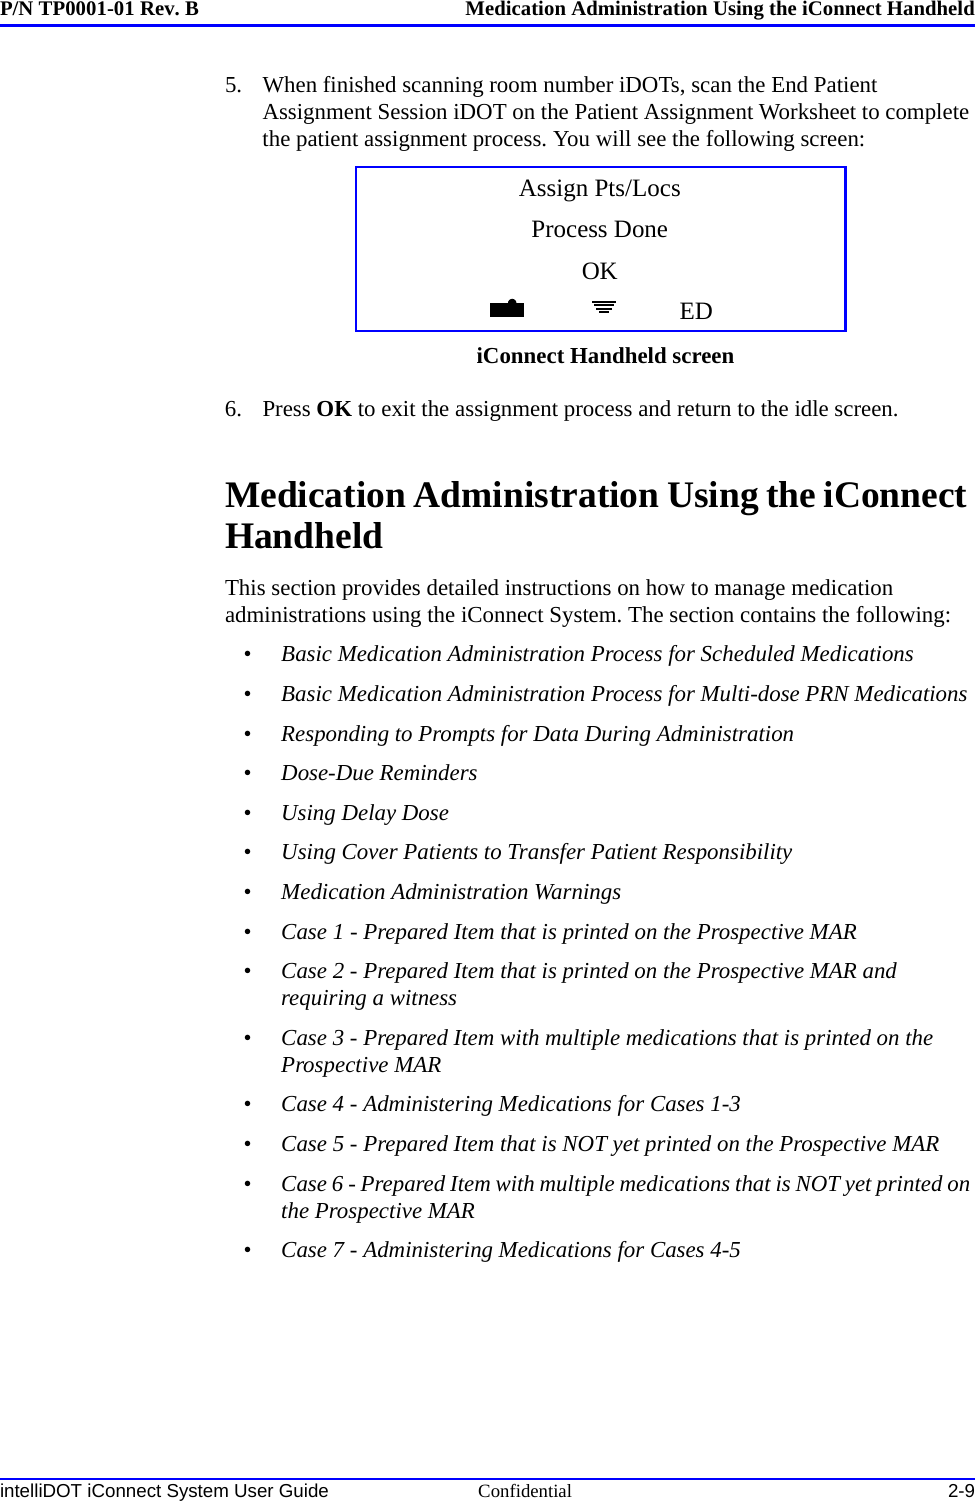 P/N TP0001-01 Rev. B Medication Administration Using the iConnect HandheldintelliDOT iConnect System User Guide Confidential 2-95. When finished scanning room number iDOTs, scan the End Patient Assignment Session iDOT on the Patient Assignment Worksheet to complete the patient assignment process. You will see the following screen:6. Press OK to exit the assignment process and return to the idle screen.Medication Administration Using the iConnect HandheldThis section provides detailed instructions on how to manage medication administrations using the iConnect System. The section contains the following:•Basic Medication Administration Process for Scheduled Medications•Basic Medication Administration Process for Multi-dose PRN Medications•Responding to Prompts for Data During Administration•Dose-Due Reminders•Using Delay Dose•Using Cover Patients to Transfer Patient Responsibility•Medication Administration Warnings•Case 1 - Prepared Item that is printed on the Prospective MAR•Case 2 - Prepared Item that is printed on the Prospective MAR and requiring a witness•Case 3 - Prepared Item with multiple medications that is printed on the Prospective MAR•Case 4 - Administering Medications for Cases 1-3•Case 5 - Prepared Item that is NOT yet printed on the Prospective MAR•Case 6 - Prepared Item with multiple medications that is NOT yet printed on the Prospective MAR•Case 7 - Administering Medications for Cases 4-5Assign Pts/LocsProcess DoneOKEDiConnect Handheld screen